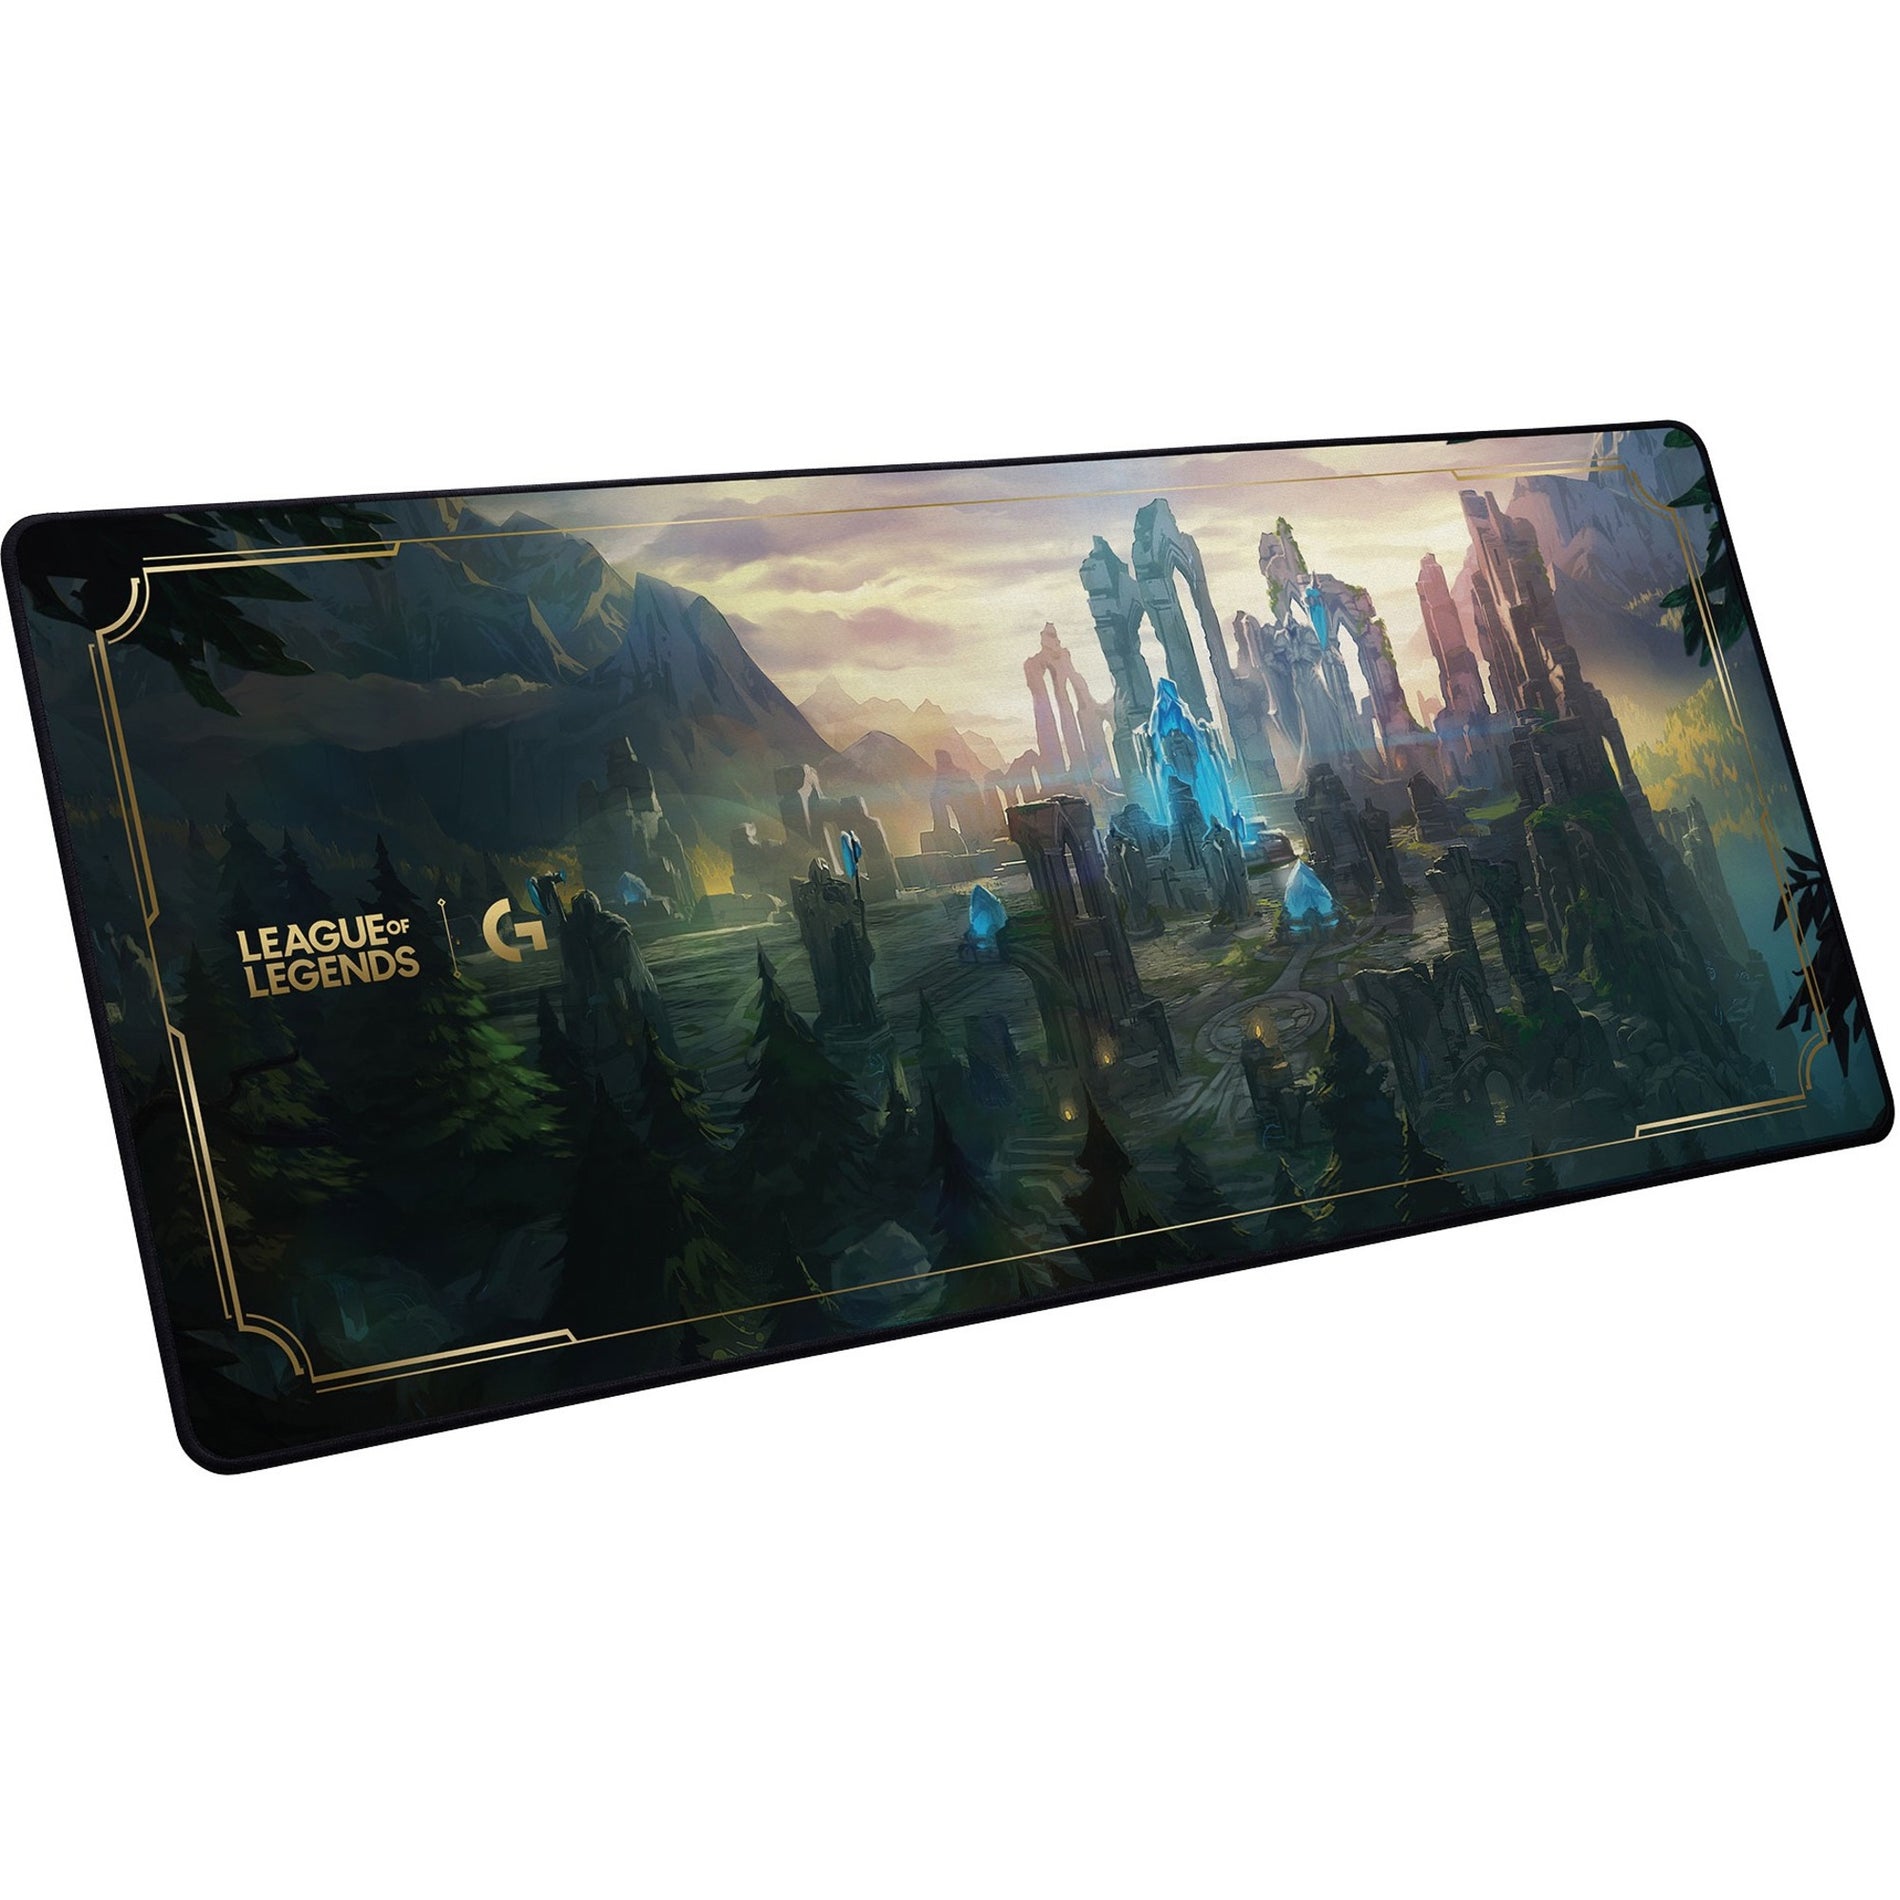 Logitech 943-000543 G840 XL Gaming Mouse Pad League of Legends Edition, Extra Large Size, Rubber and Cloth Material